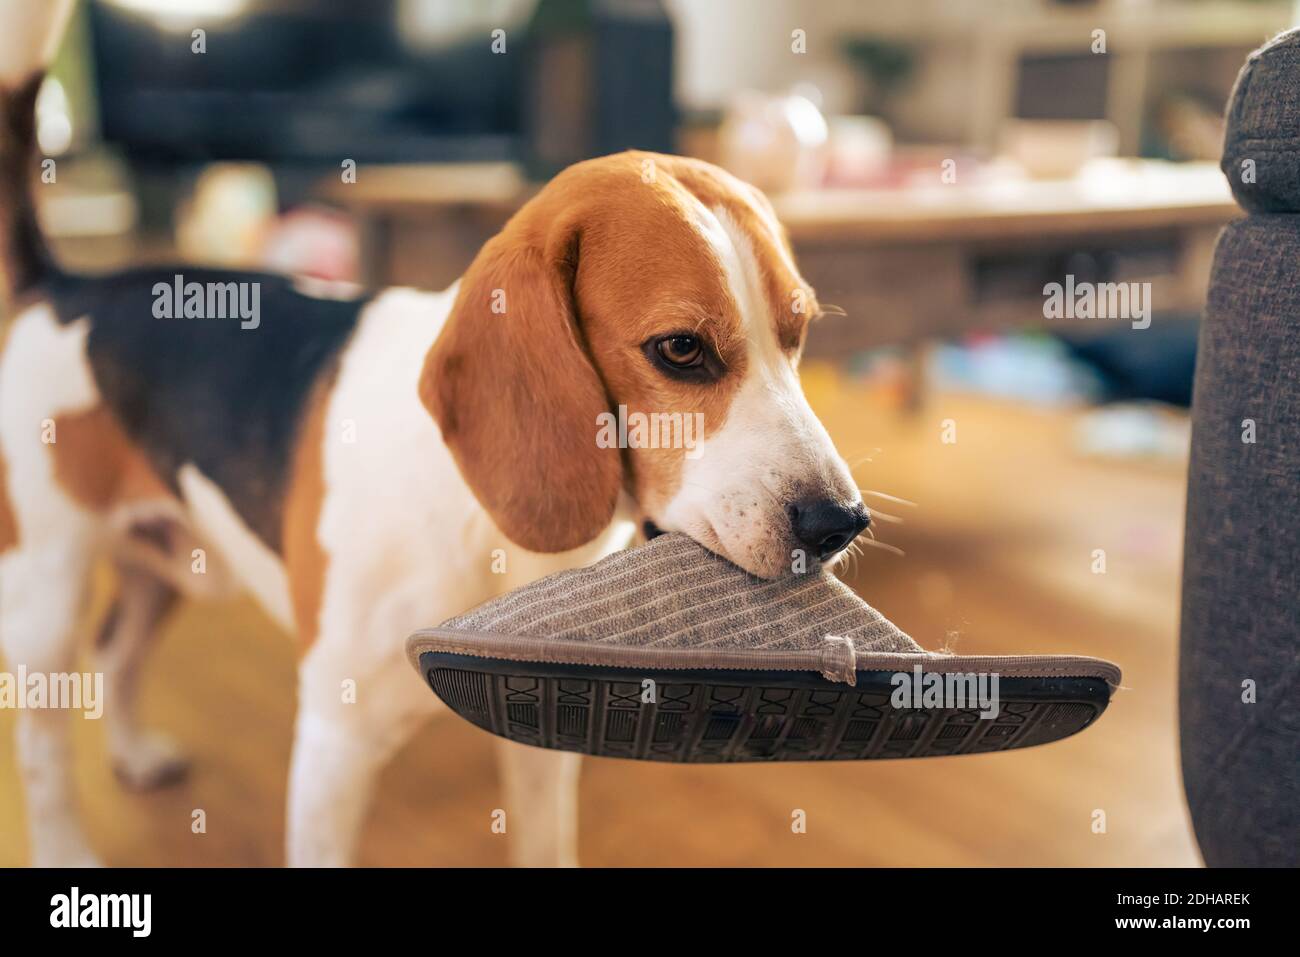 Dog holding a slipper in mouth. Standing indoors Stock Photo